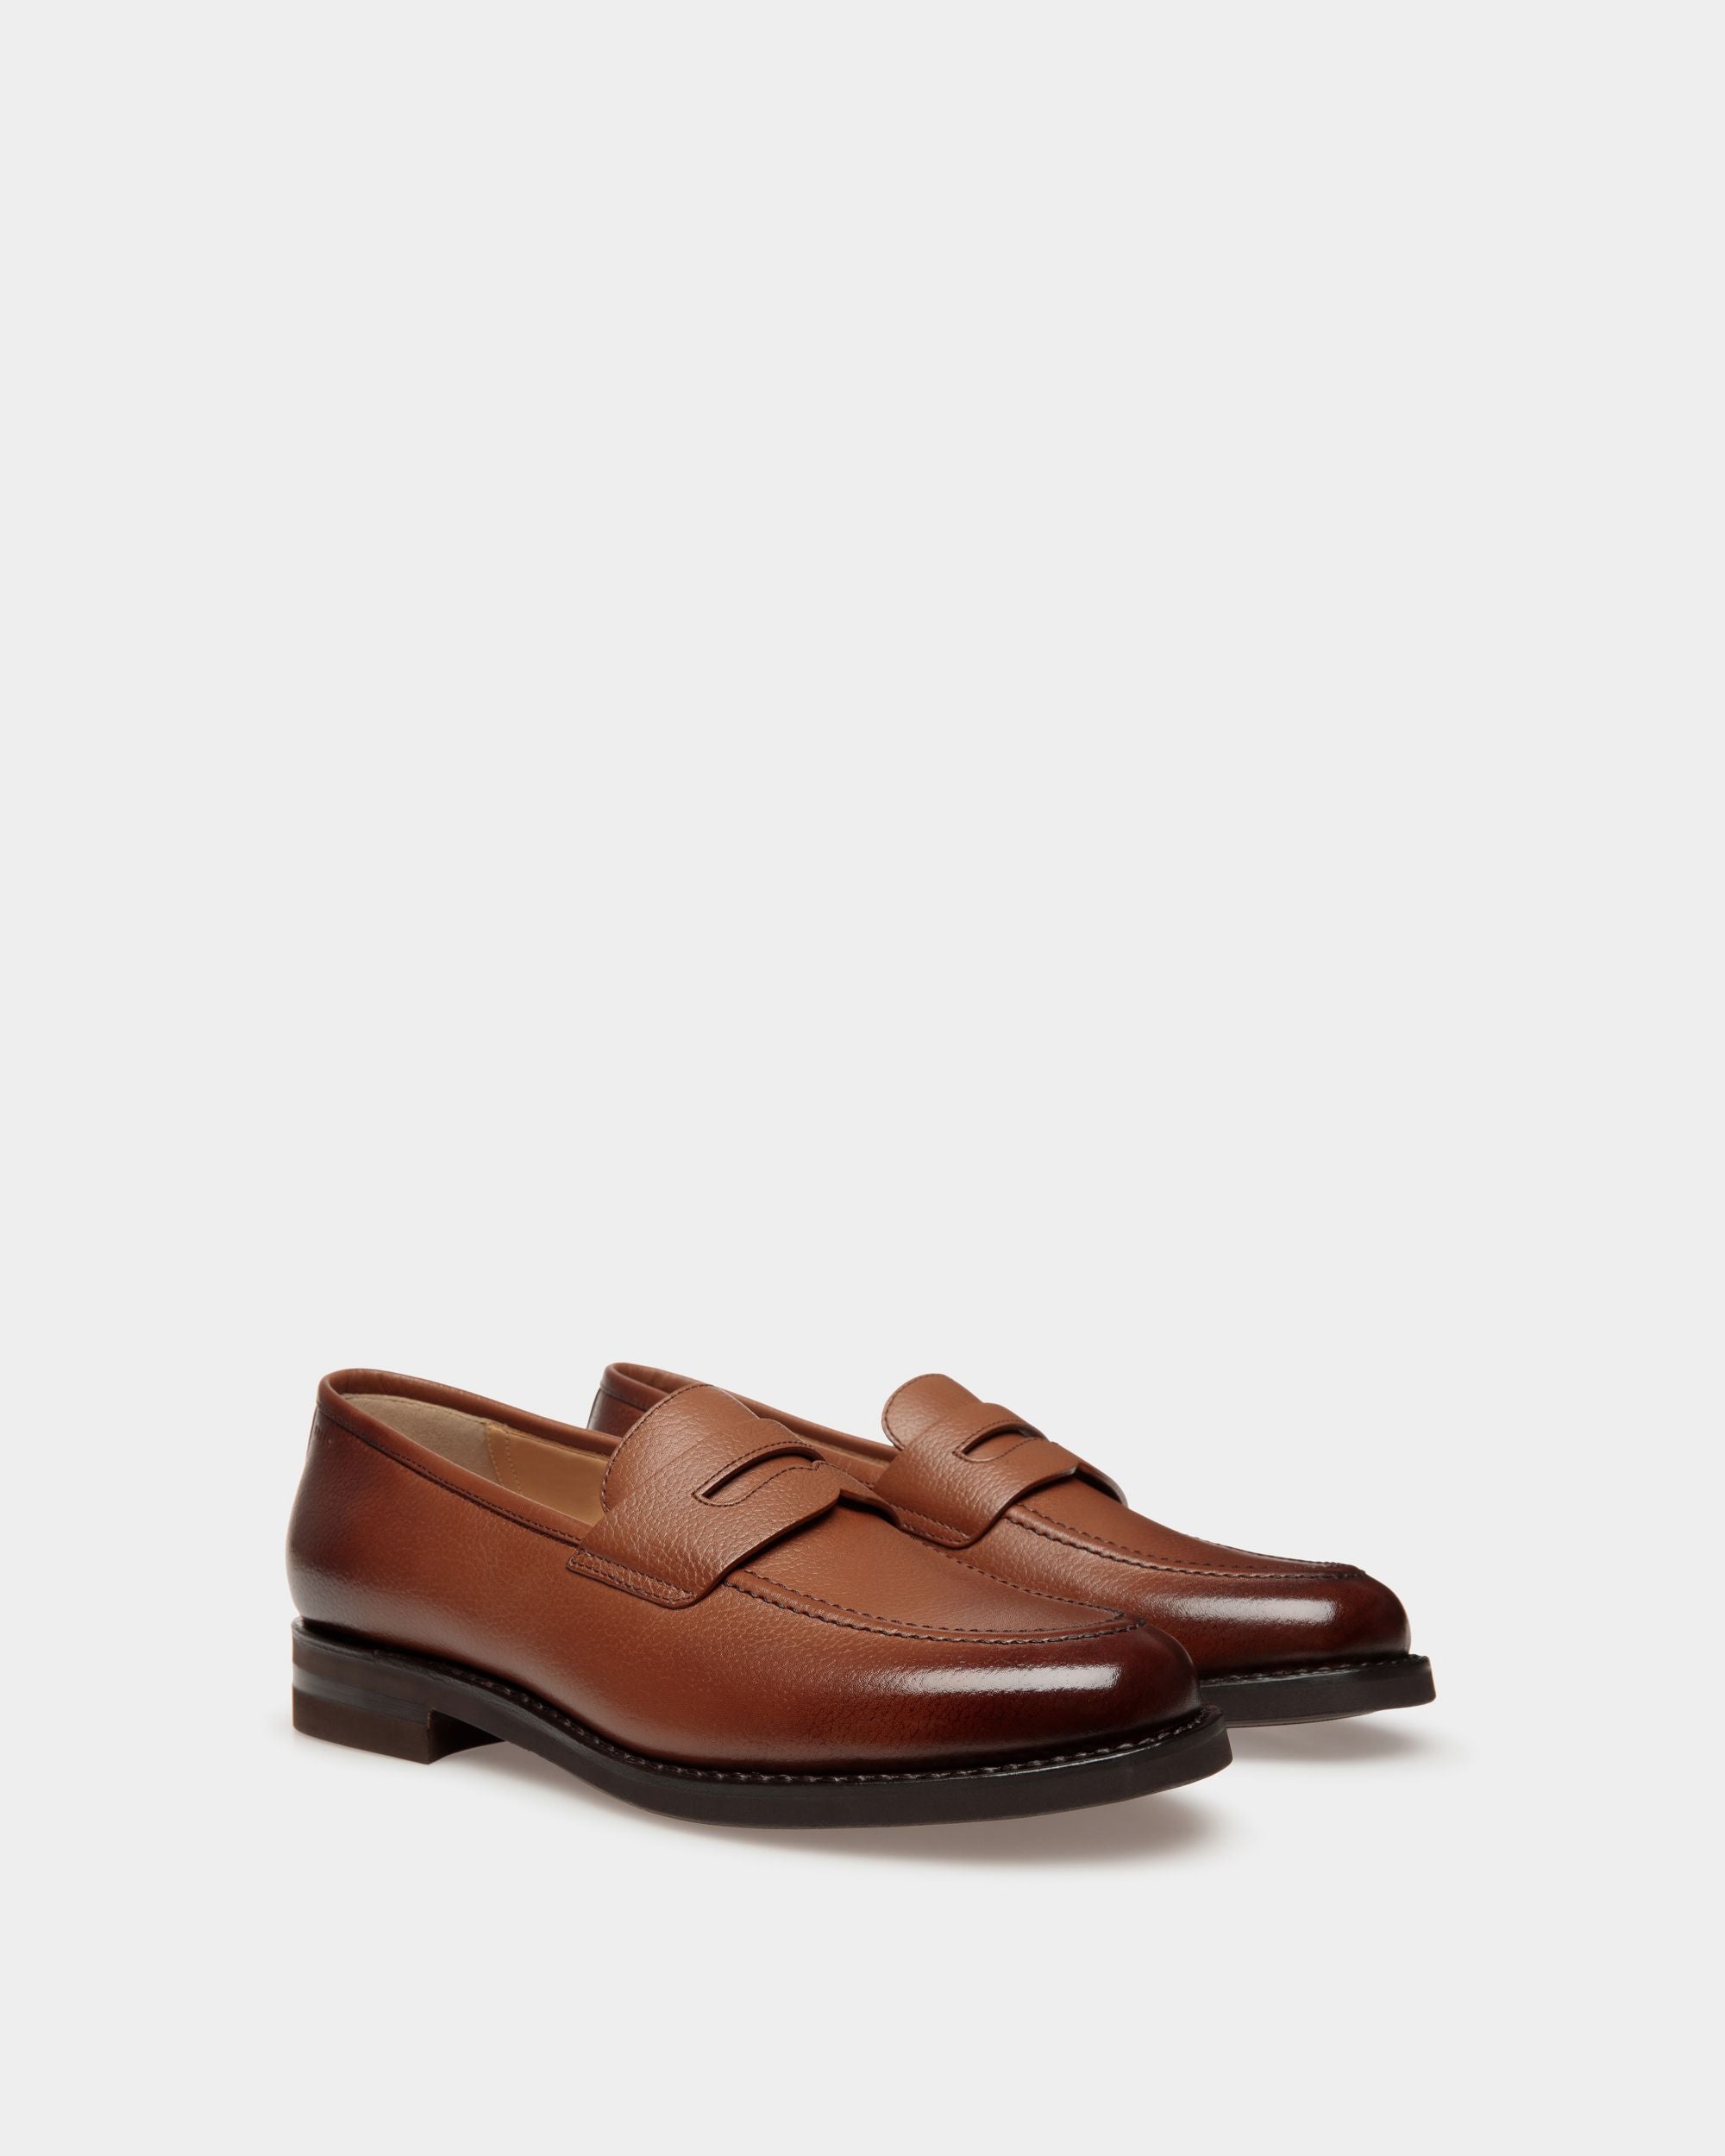 Schoenen | Men's Loafer in Brown Embossed Leather | Bally | Still Life 3/4 Front